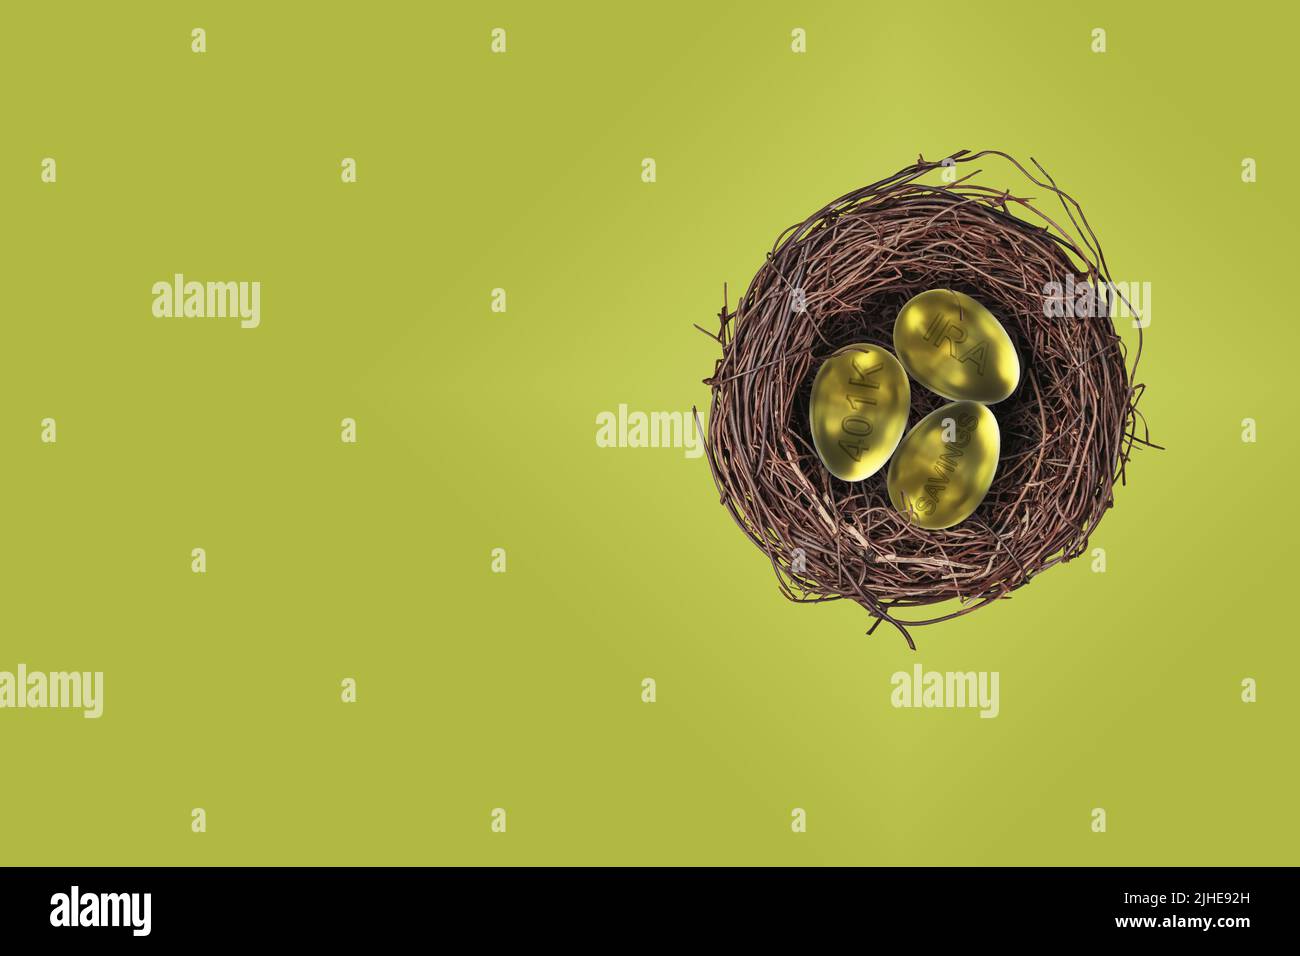 nest egg eggs pension pot concept gold golden egg eggs with IRA 401K & savings stamped embossed colorful green background Stock Photo